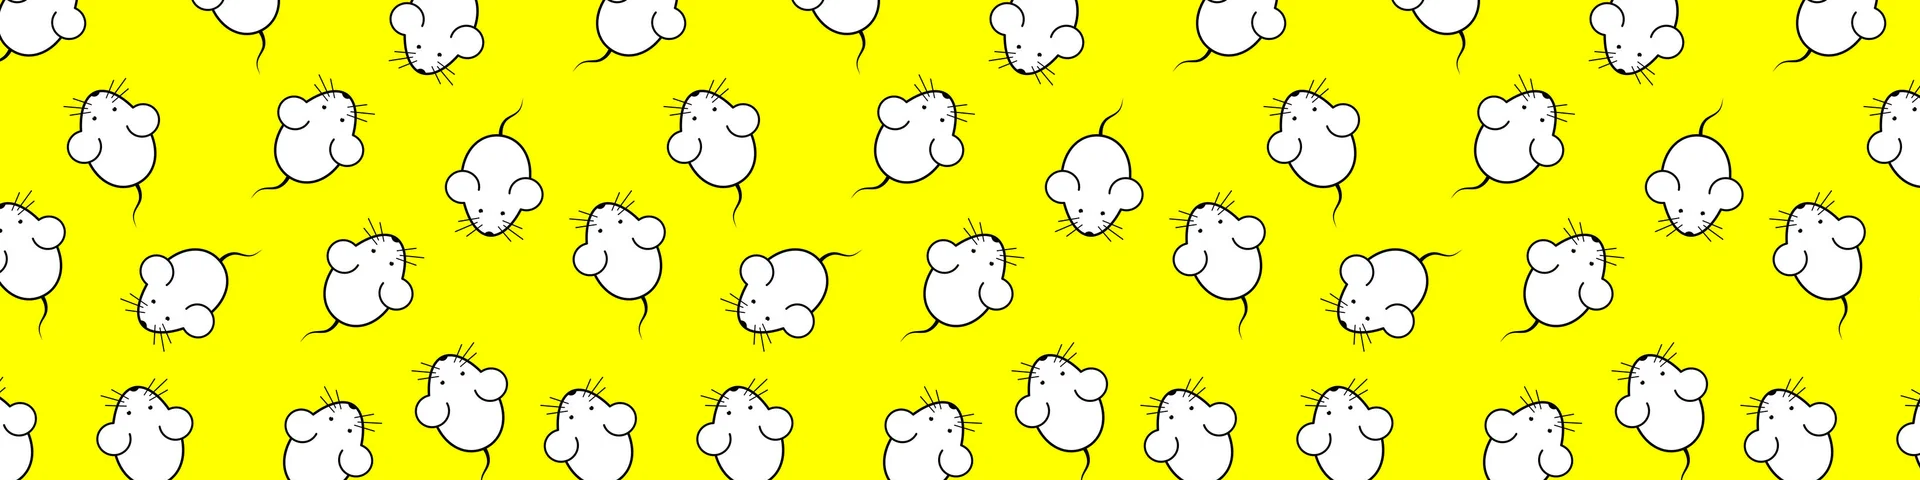 Rodent Buddy Wallpapers